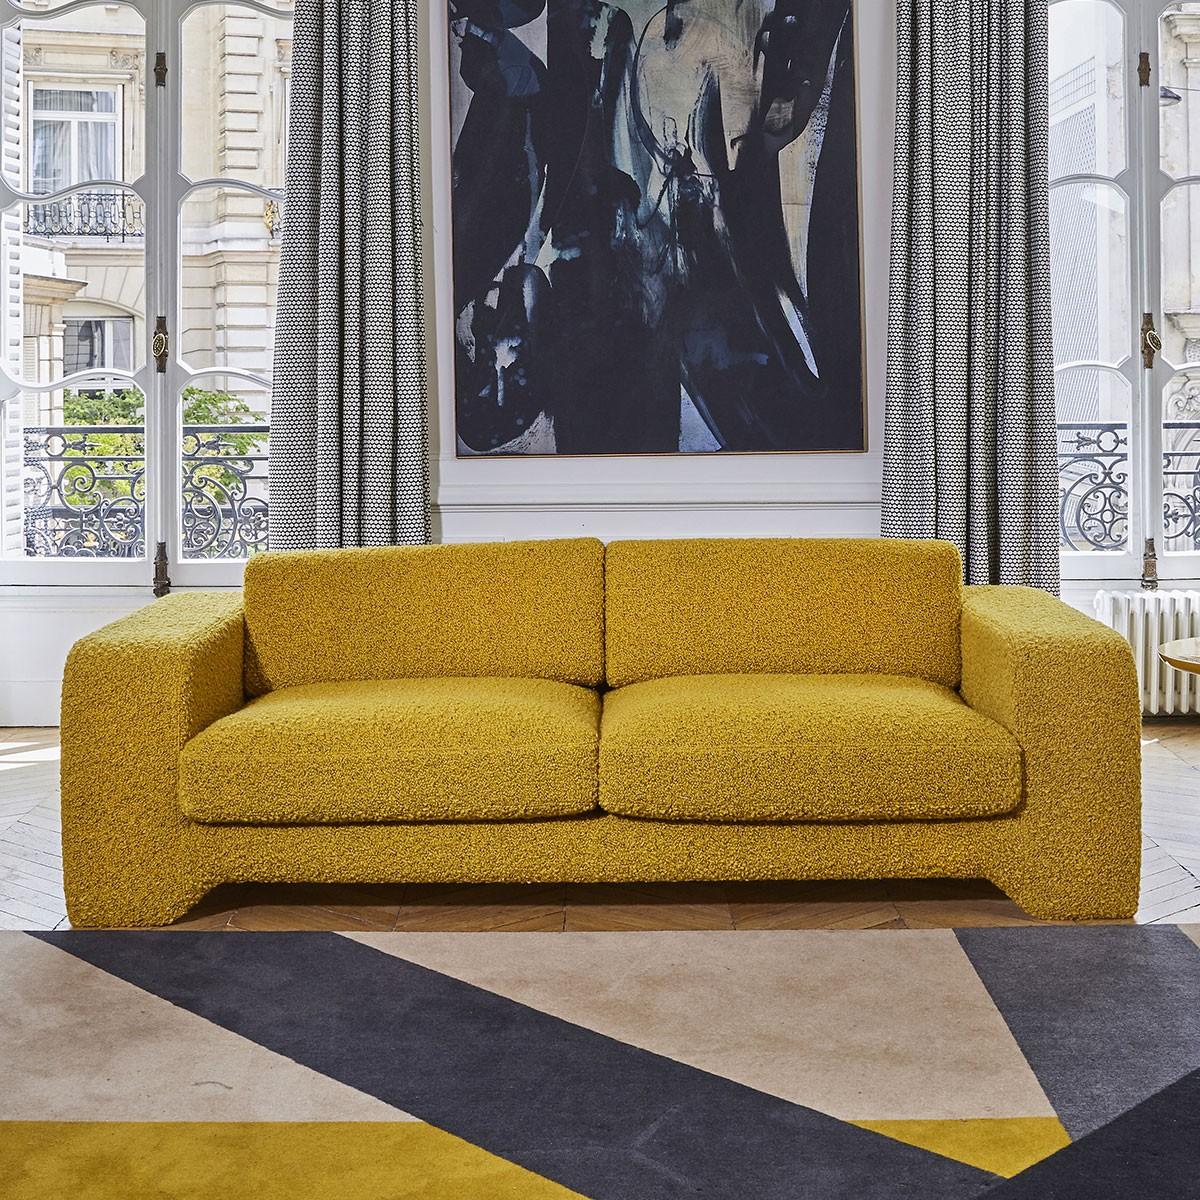 Popus Editions Giovanna 2.5 Seater Sofa in Apricot Cork Linen Upholstery.

Giovanna is a sofa with a strong profile. A sober, plush line, with this famous detail that changes everything, so as not to forget its strength of character and this